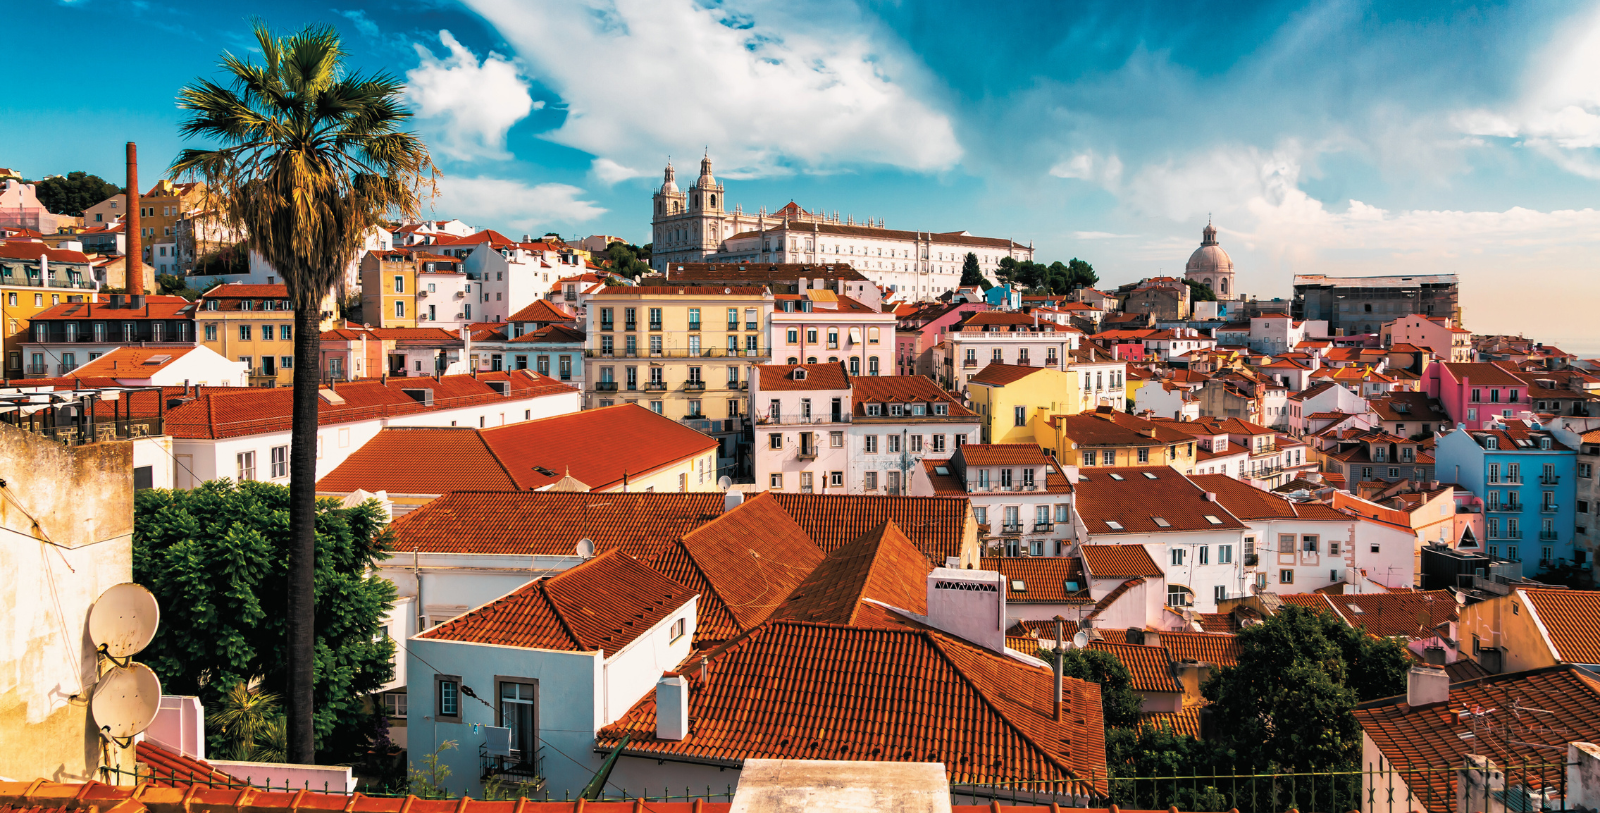 Explore the charming maze of narrow, hilly, meandering cobblestone streets in Alfama, a historic district known for its postcard-ready cityscape of brick-red rooflines and Tagus River views and home to Santa Apolónia Station.